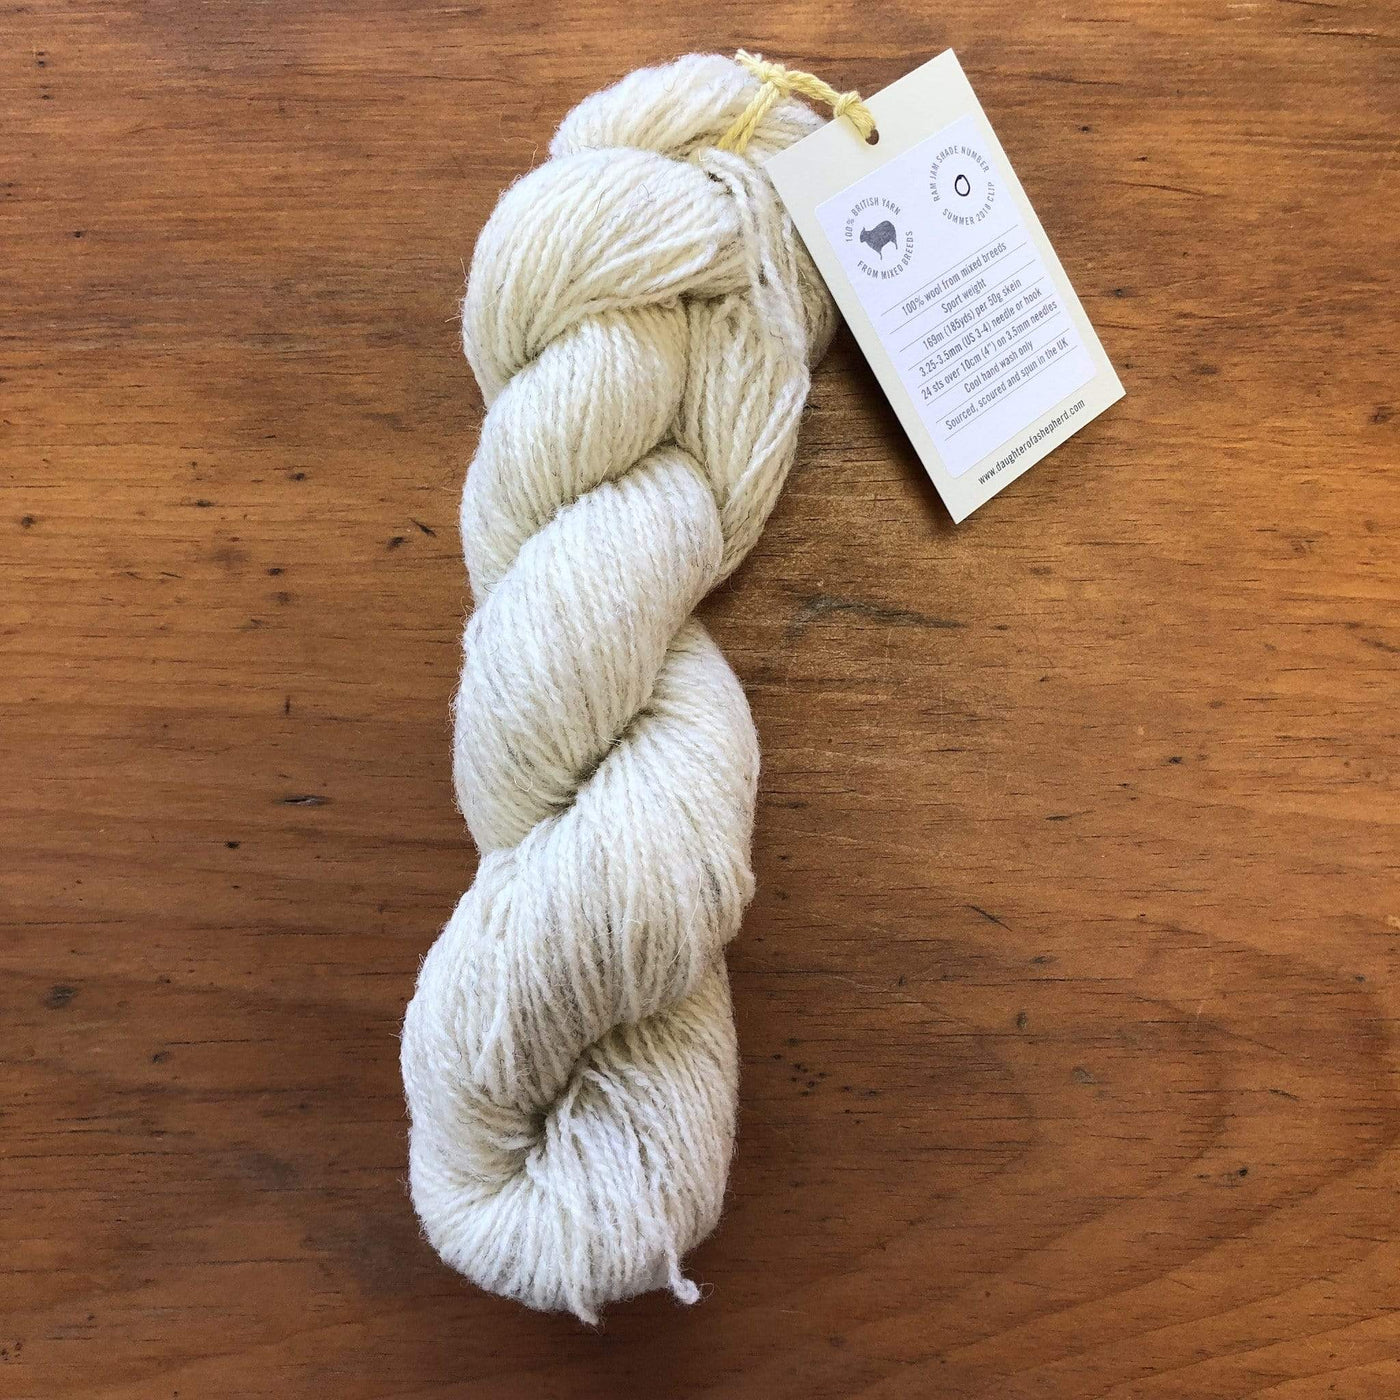 The Woolly Thistle Ram Jam Sport 2ply yarn from Daughter of a Shepherd in Natural White